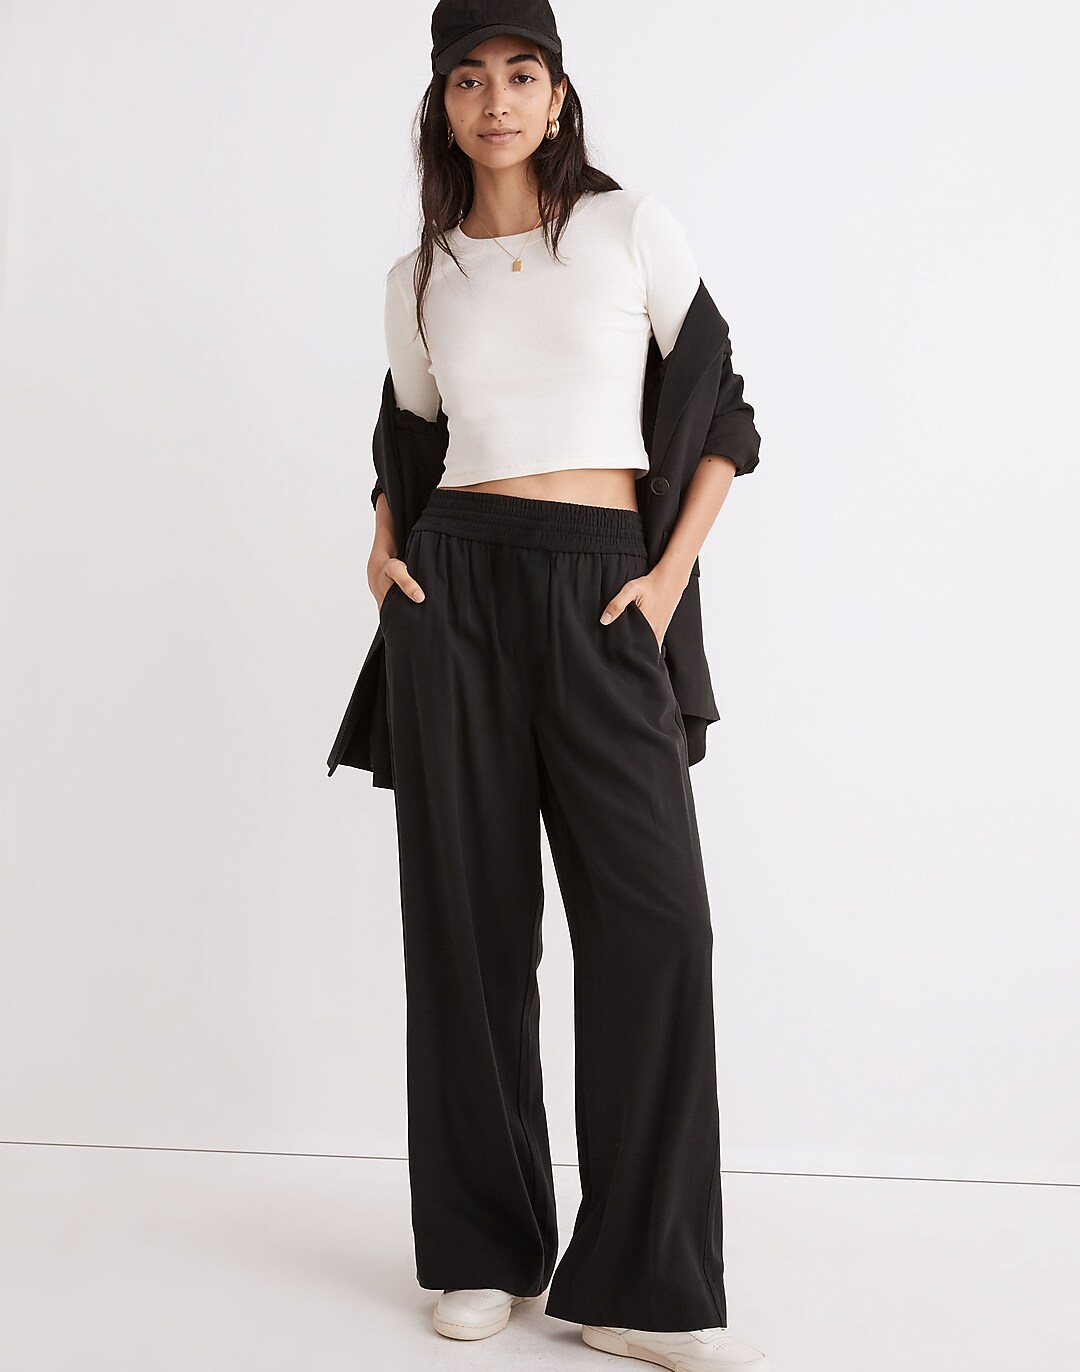 Super High Waisted Ruched Wide Leg Pant